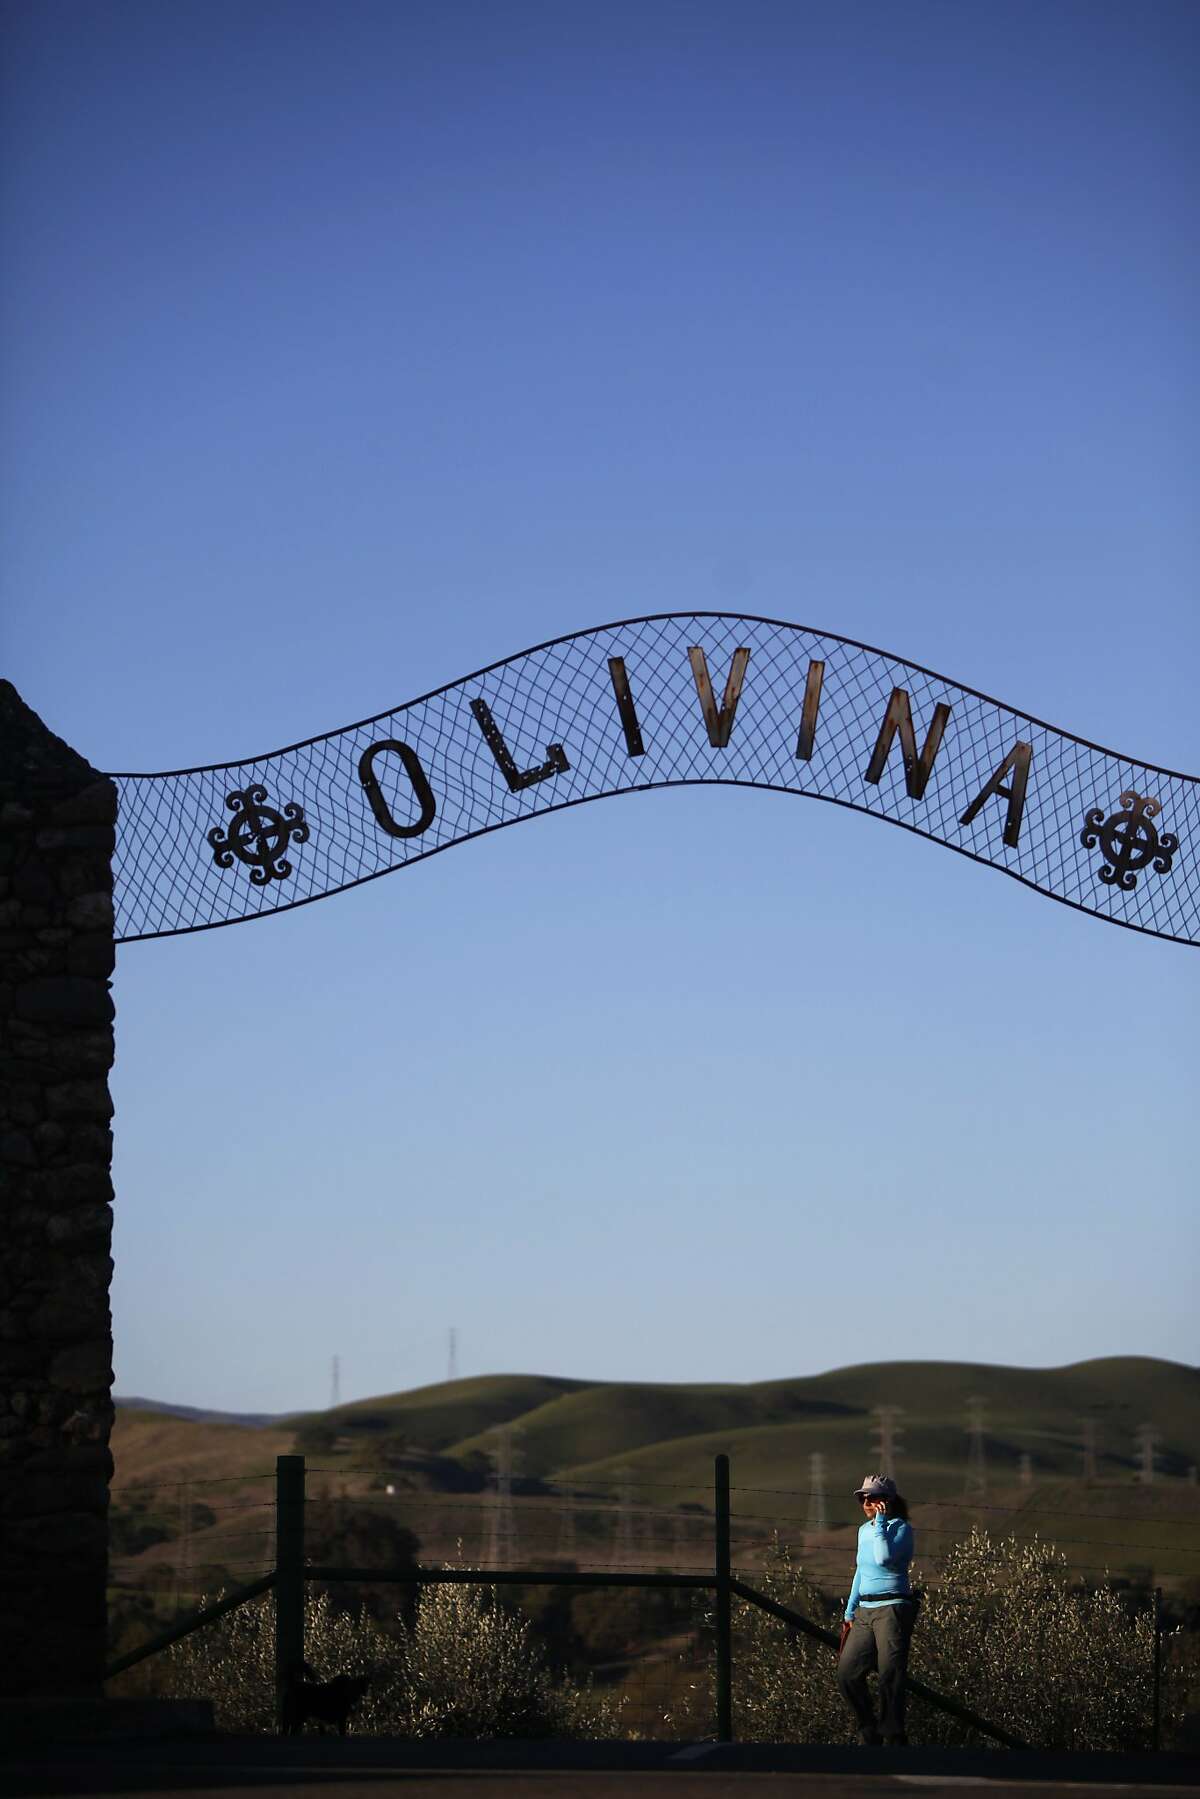 A pedestrian passes behind an arch marking one corner of The Olivina olive oil estate on March 13, 2014 in Livermore, Calif. The arch sits on a public-access bike path.